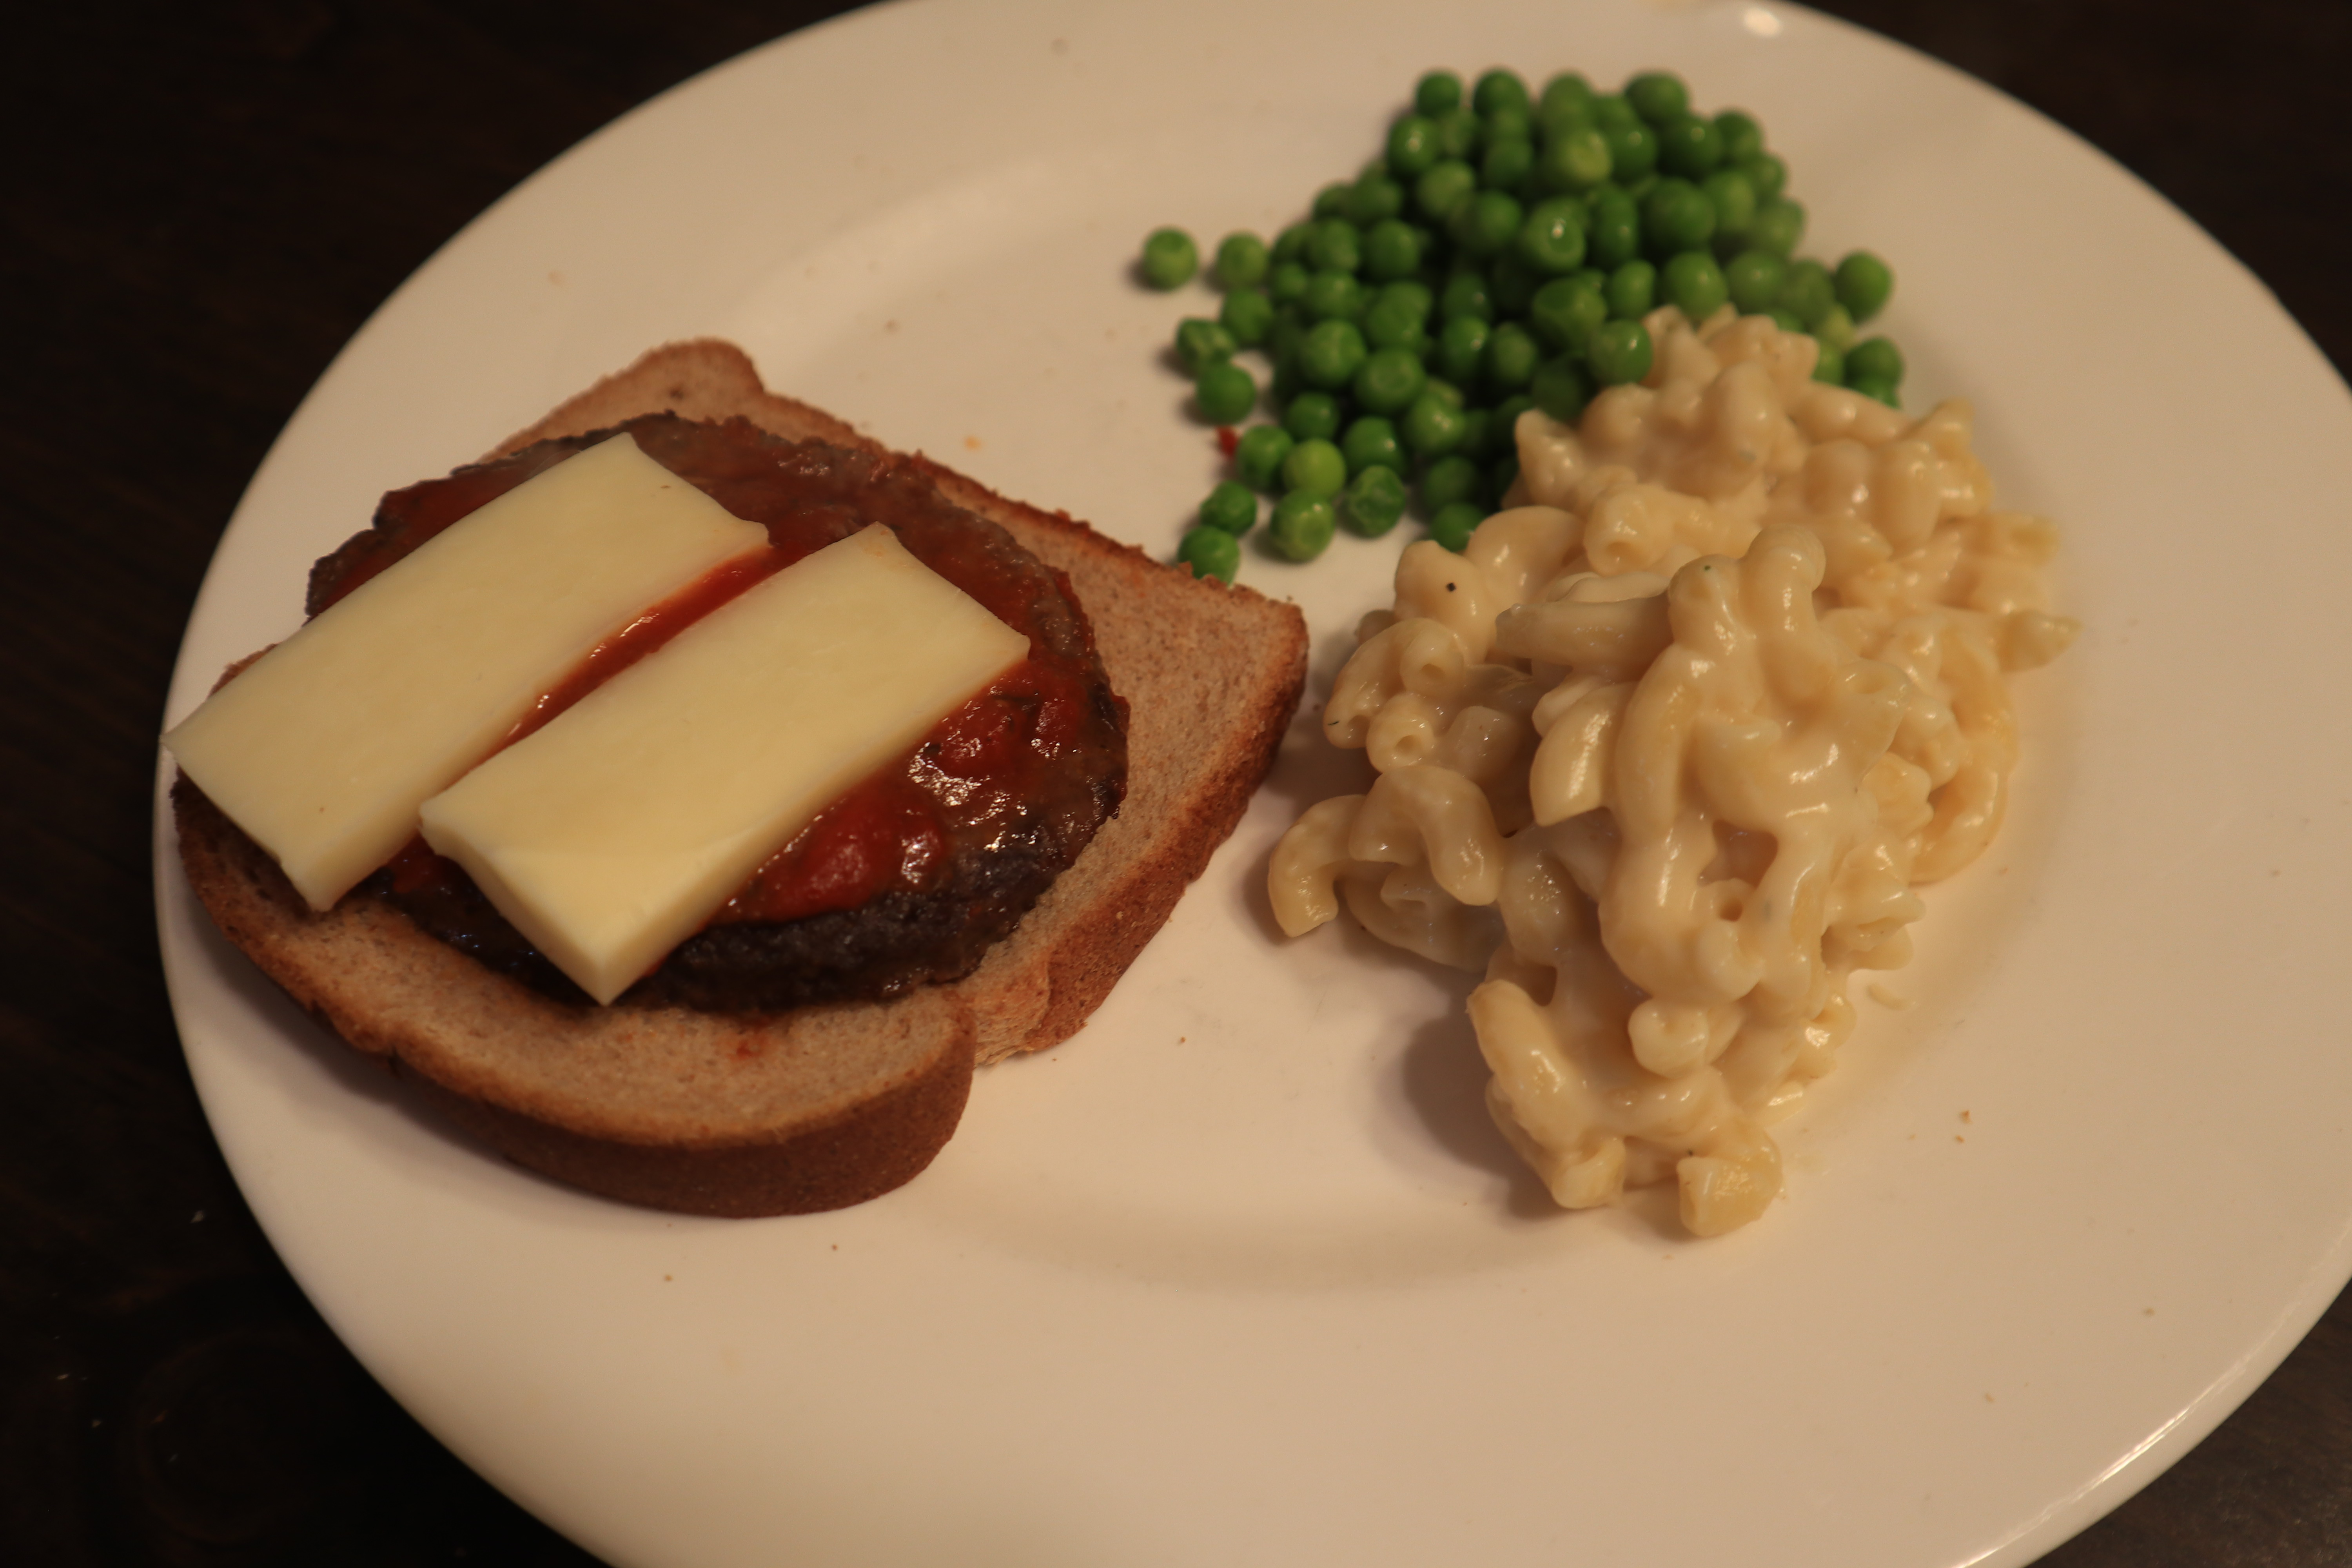 Pizza Burgers for dinner with peas and mac & cheese!